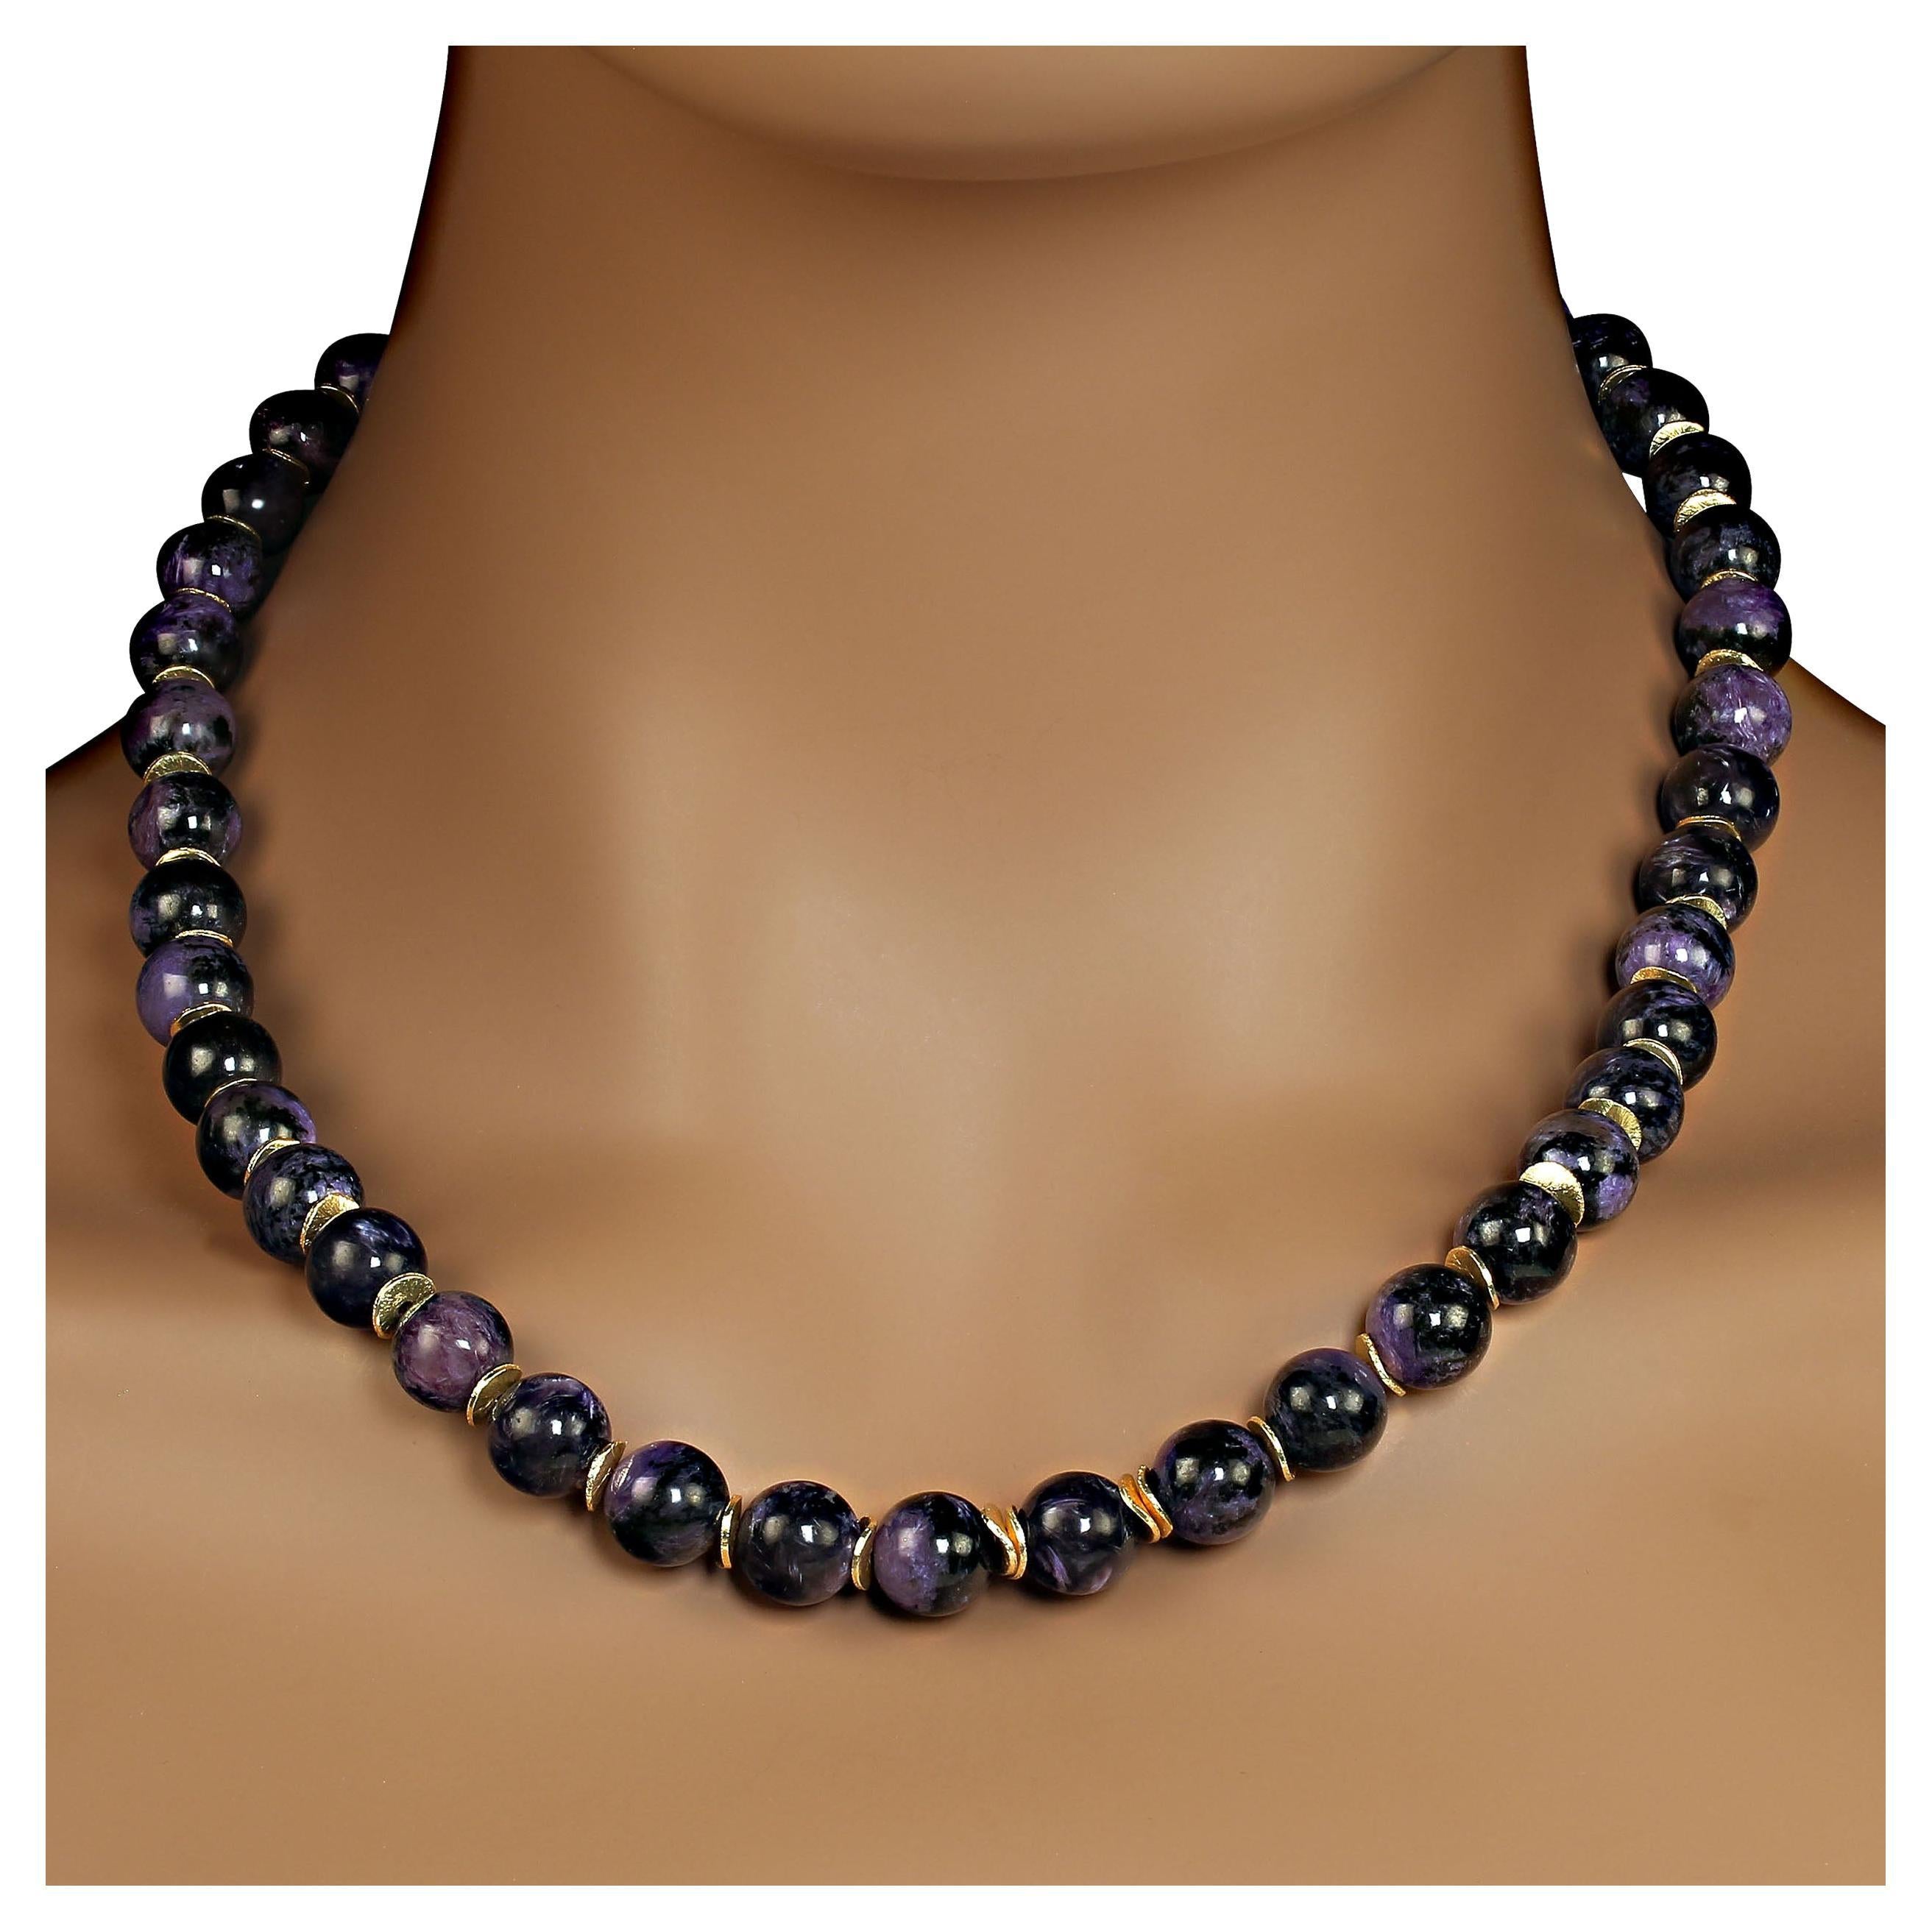 20-21 Inch expandable necklace of gorgeous charoite with goldy flutter accents.  The charoite is highly polished and smooth 10mm. There are two loops in the gold-plate toggle clasp for adjustable sizing. MN2328